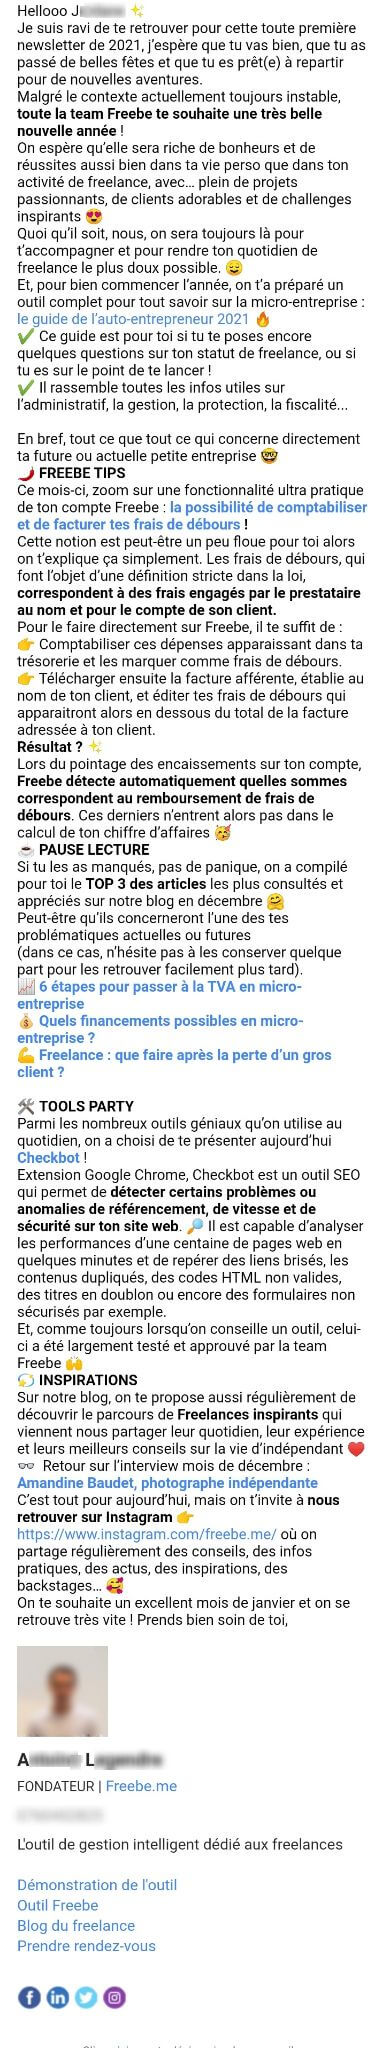 Exemple campagne emailing FreeBee